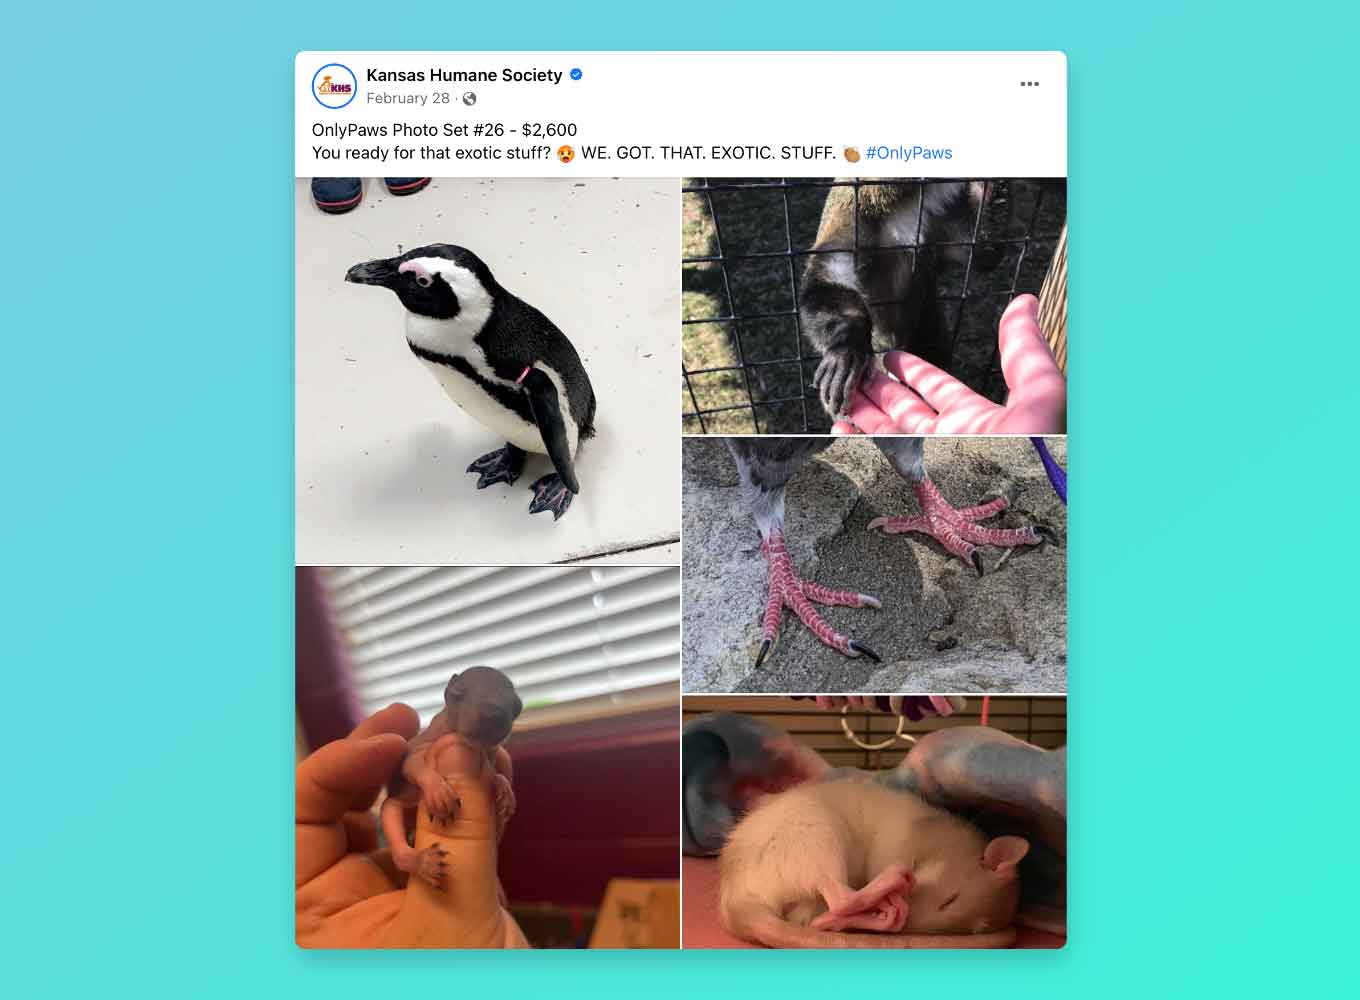 Facebook post: OnlyPaws Photo Set #25, $2,600. You ready for that exotic stuff? We got that exotic stuff! A photo gallery shows a penguin, mouse, and bird talons.